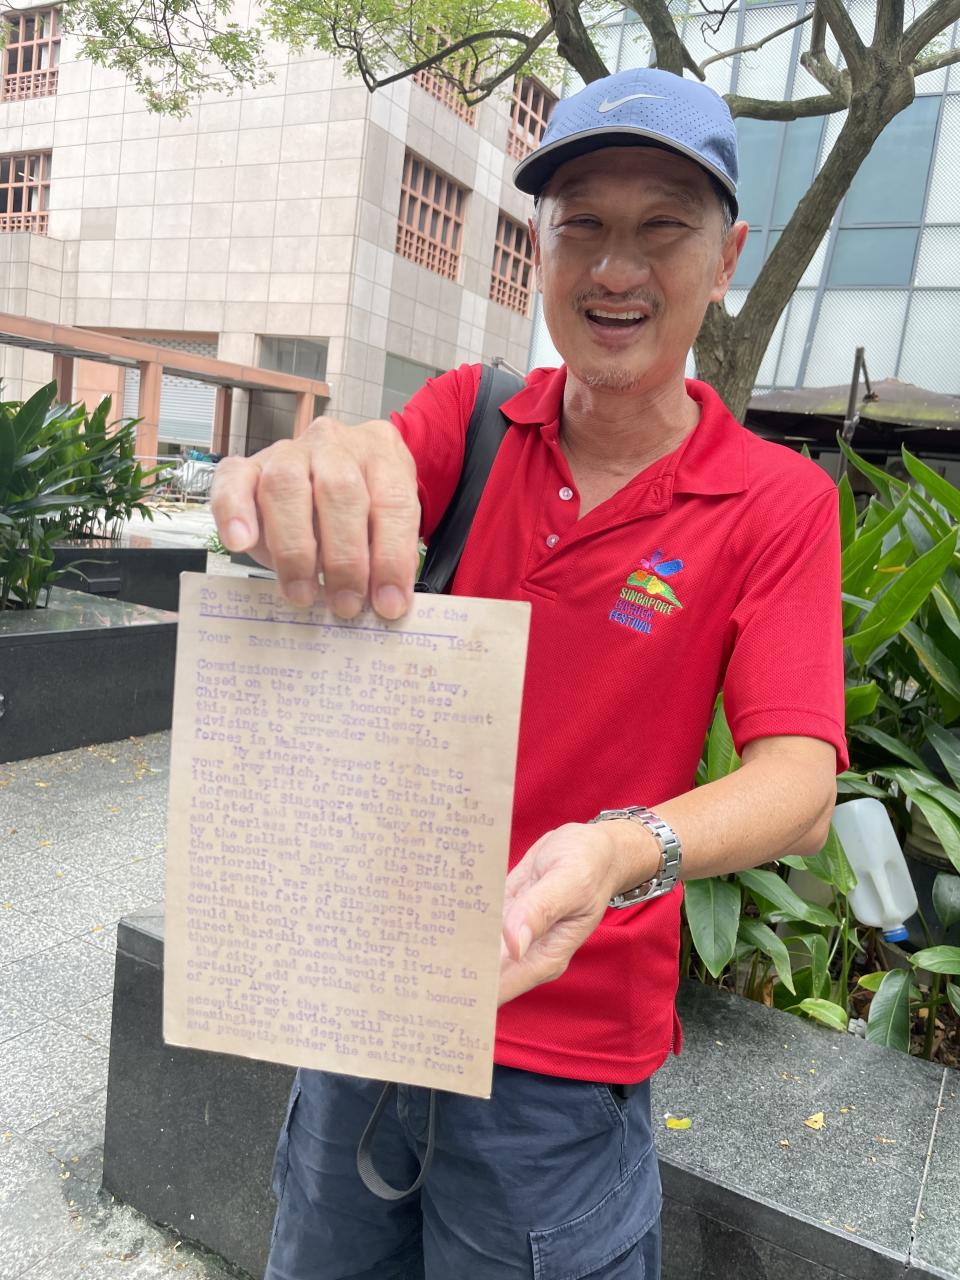 Our guide regaled us with stories of Singapore and also showed us a replica of a letter by the Japanese asking the British to surrender. PHOTO: Cadence Loh, Yahoo Life Singapore